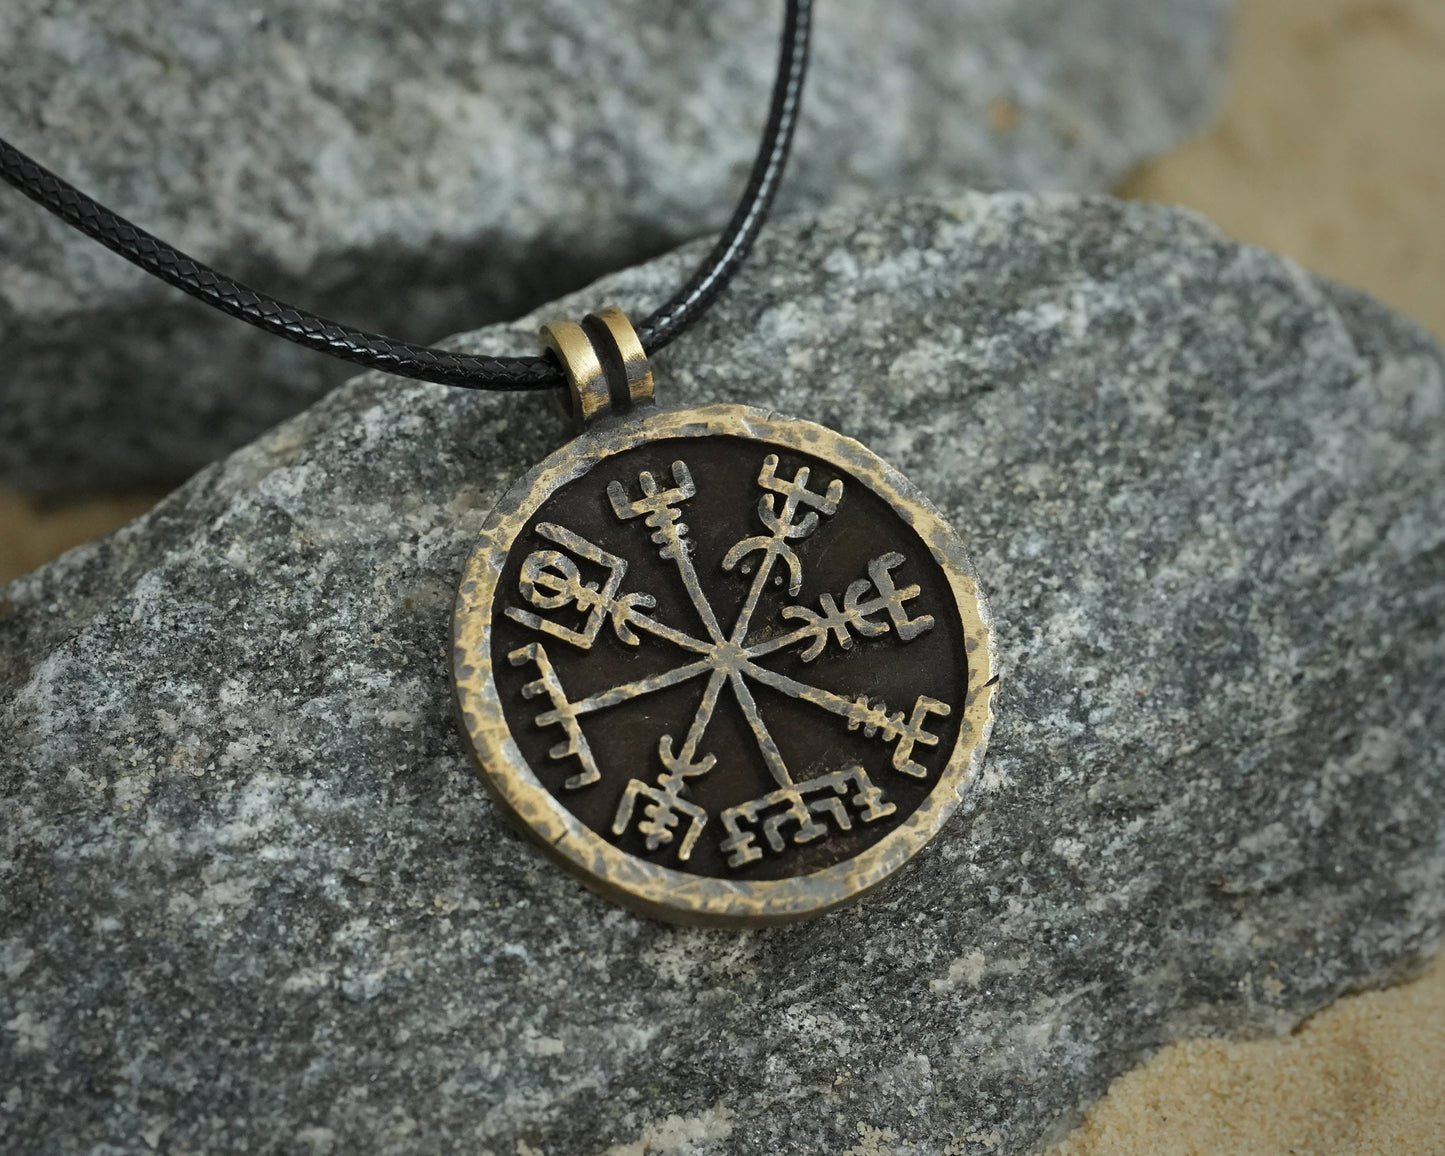 Dual Sided Viking Necklace With Vegvisir And Aegishjalmur Symbols, Protects Against Evil Eye And Shows The Right Path To Choose - Baldur Jewelry